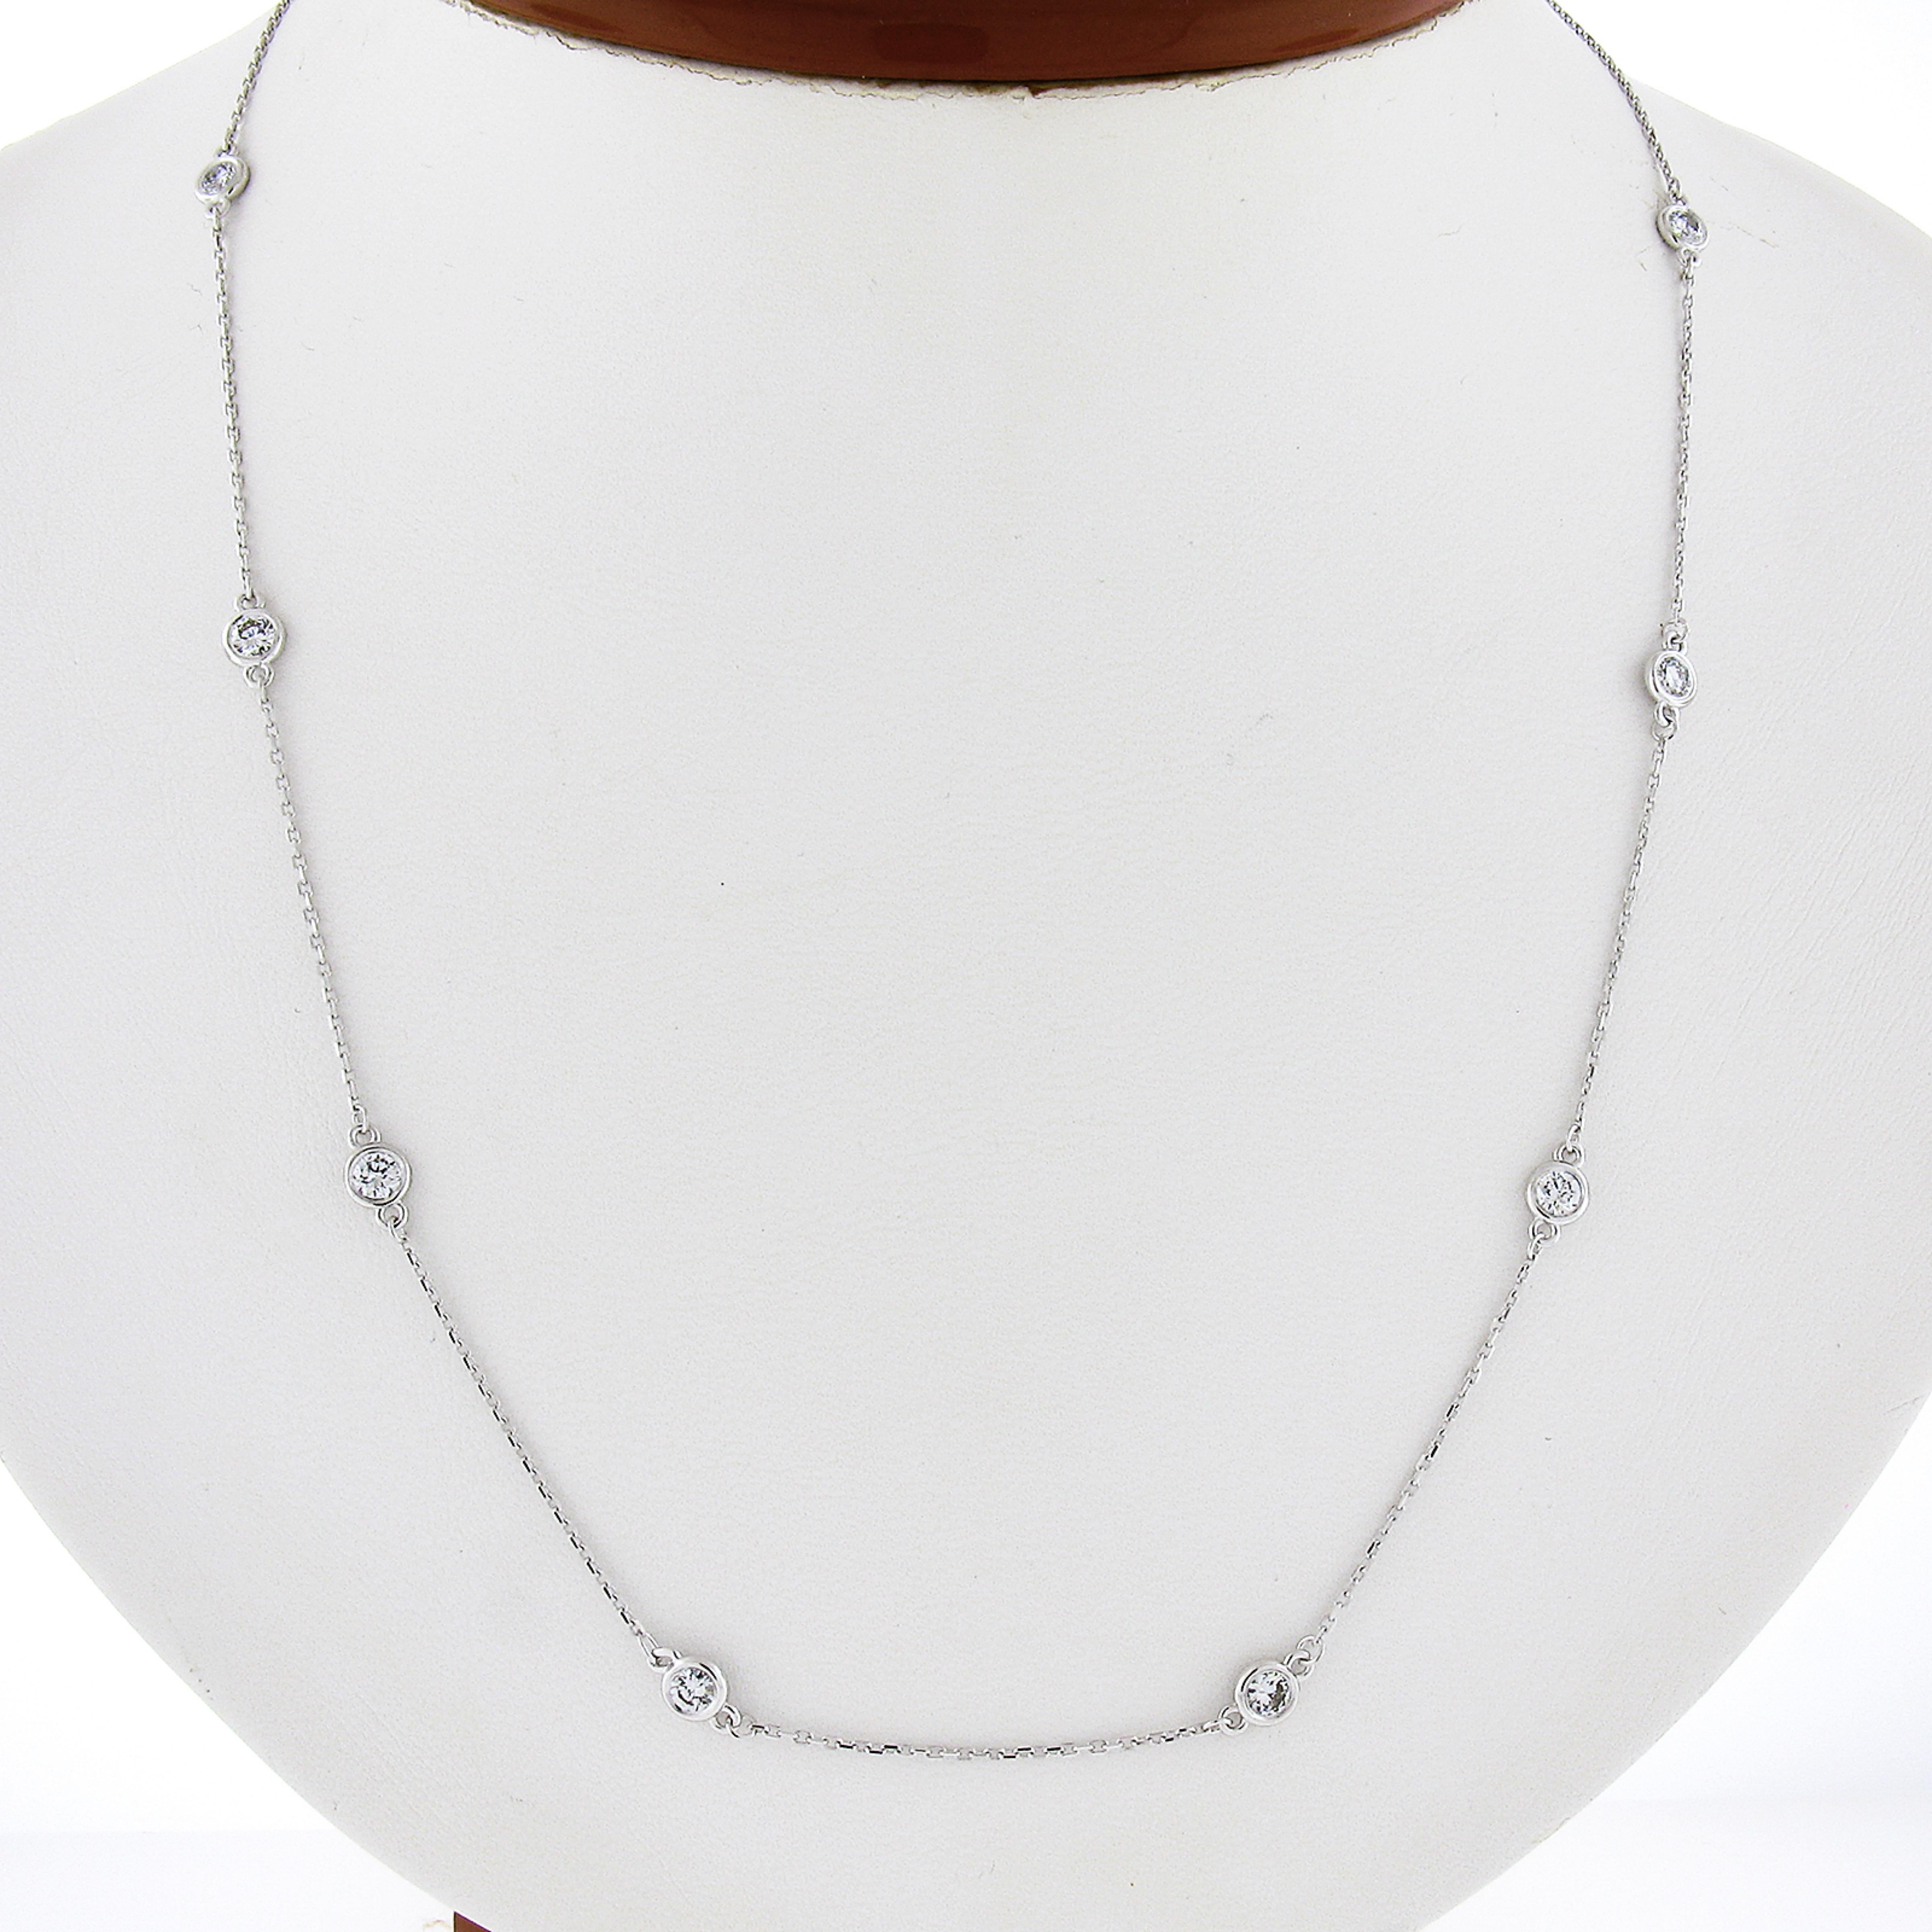 This classic diamond by the yard necklace is newly crafted in solid 14k white gold and features cable link chain with 10 bezel settings that carry the stunning diamonds along the necklace. The diamonds are round brilliant cut and total approximately